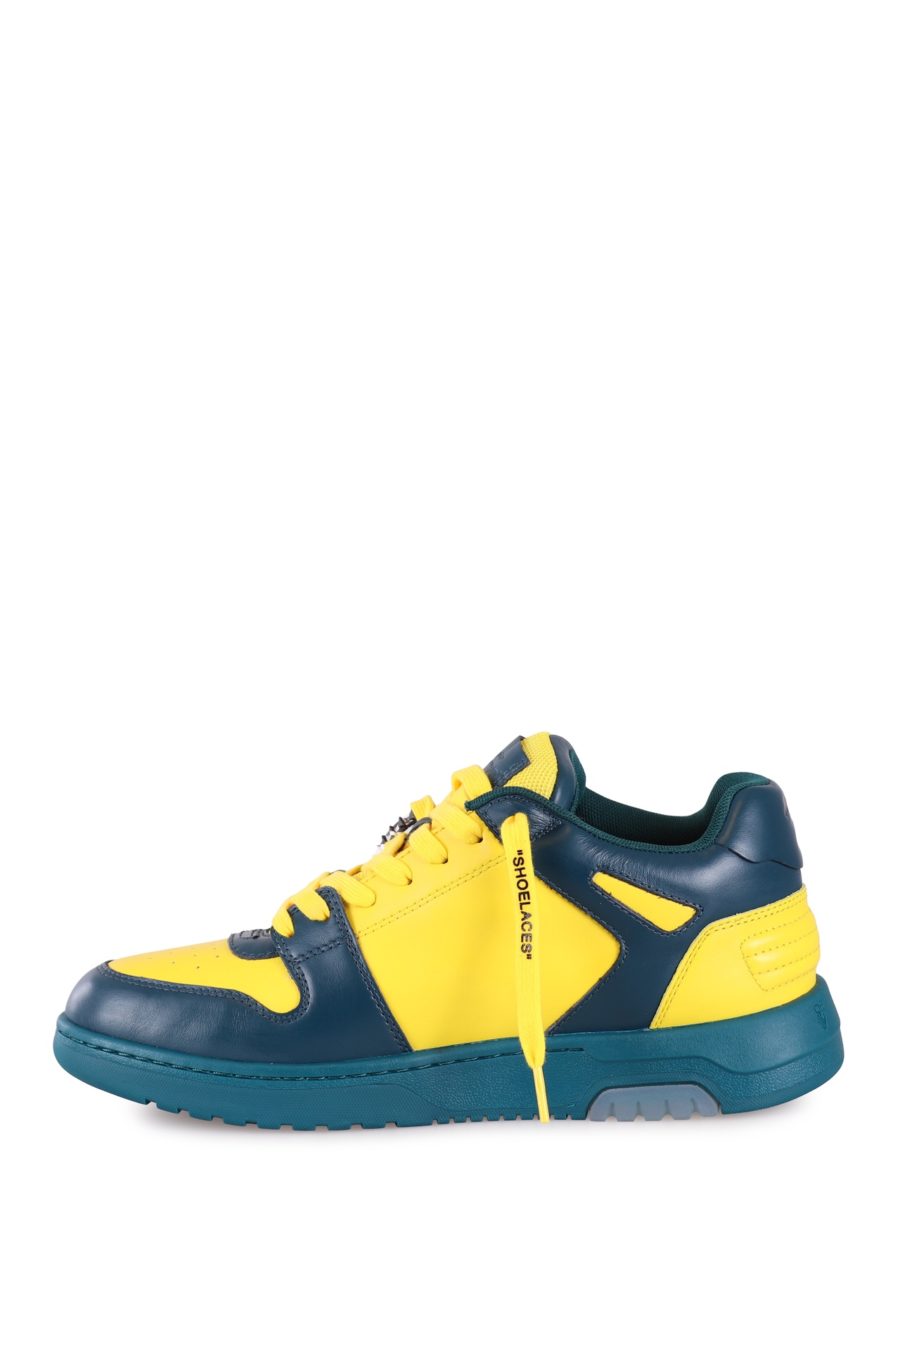 Trainers Off-White "out of office" blue with yellow - c44310bccc4f4001d88087942e5bc43352db90e5